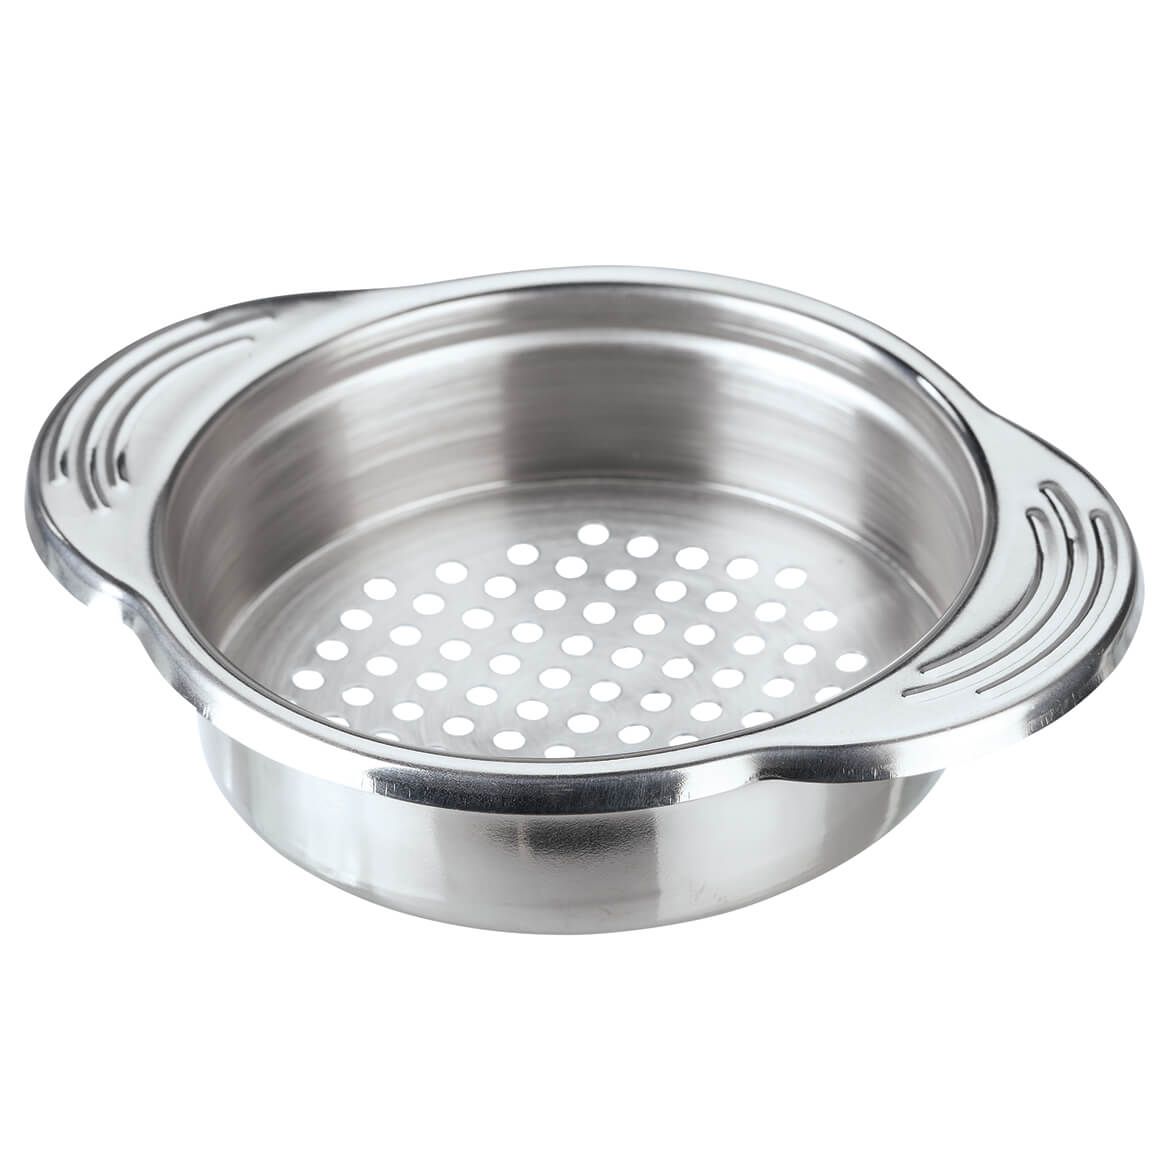 Universal Stainless Can and Jar Strainer by Home Marketplace + '-' + 370581